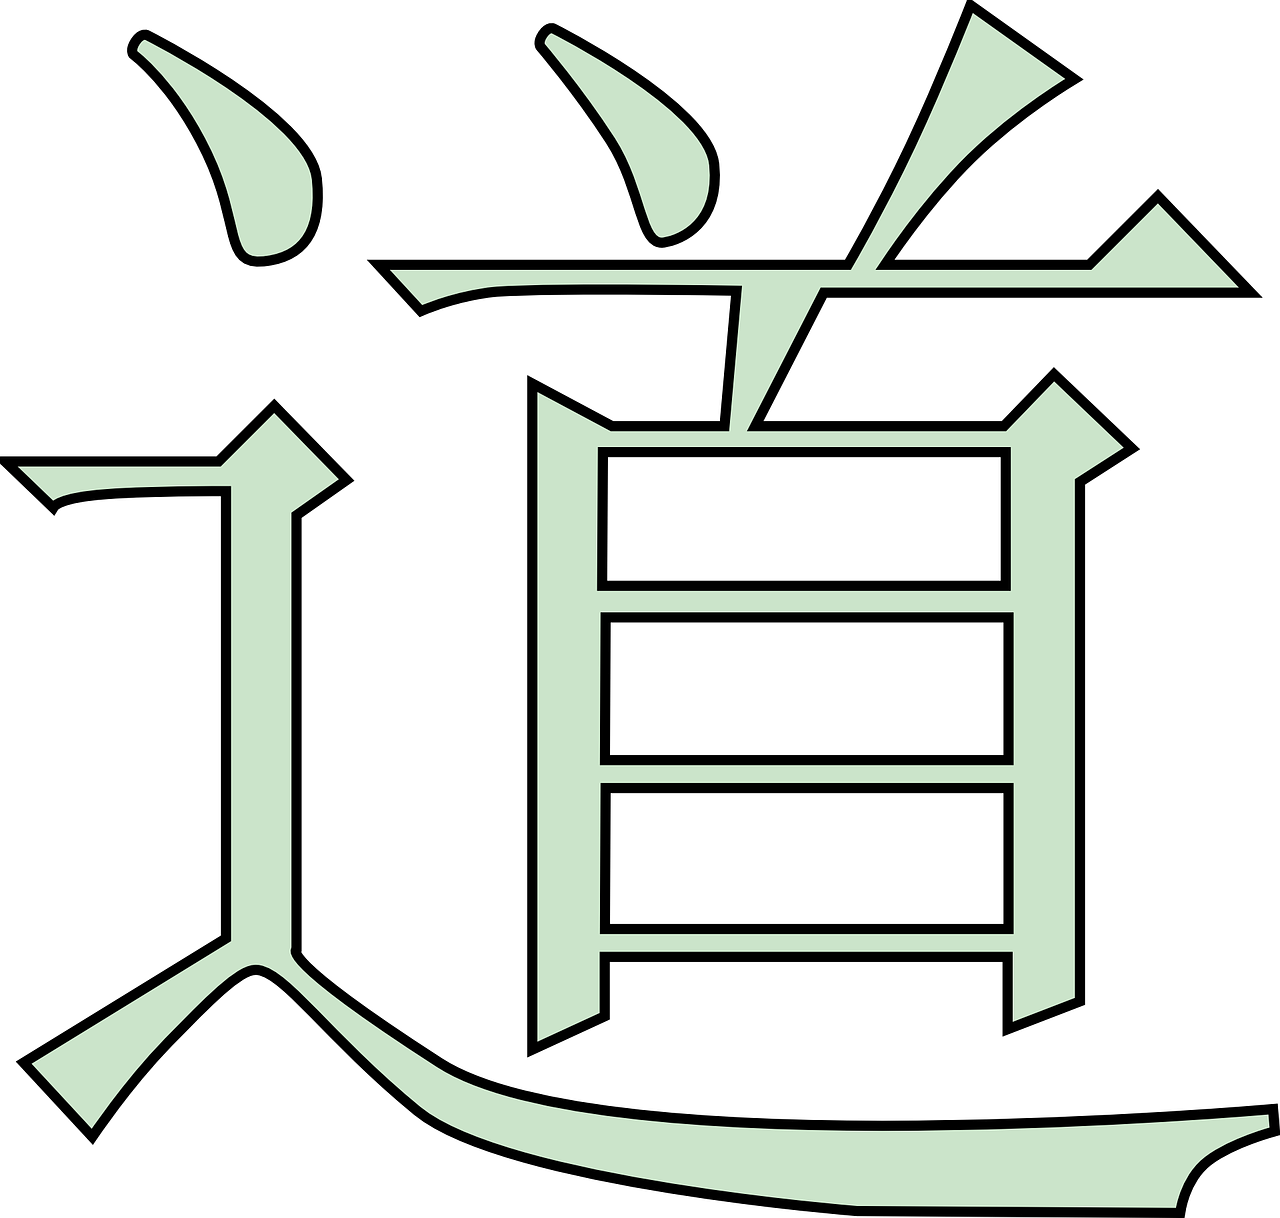 dao,belief,philosophy,tao,daoism,taoism,chinese,sign,symbol,free vector graphics,free pictures, free photos, free images, royalty free, free illustrations, public domain